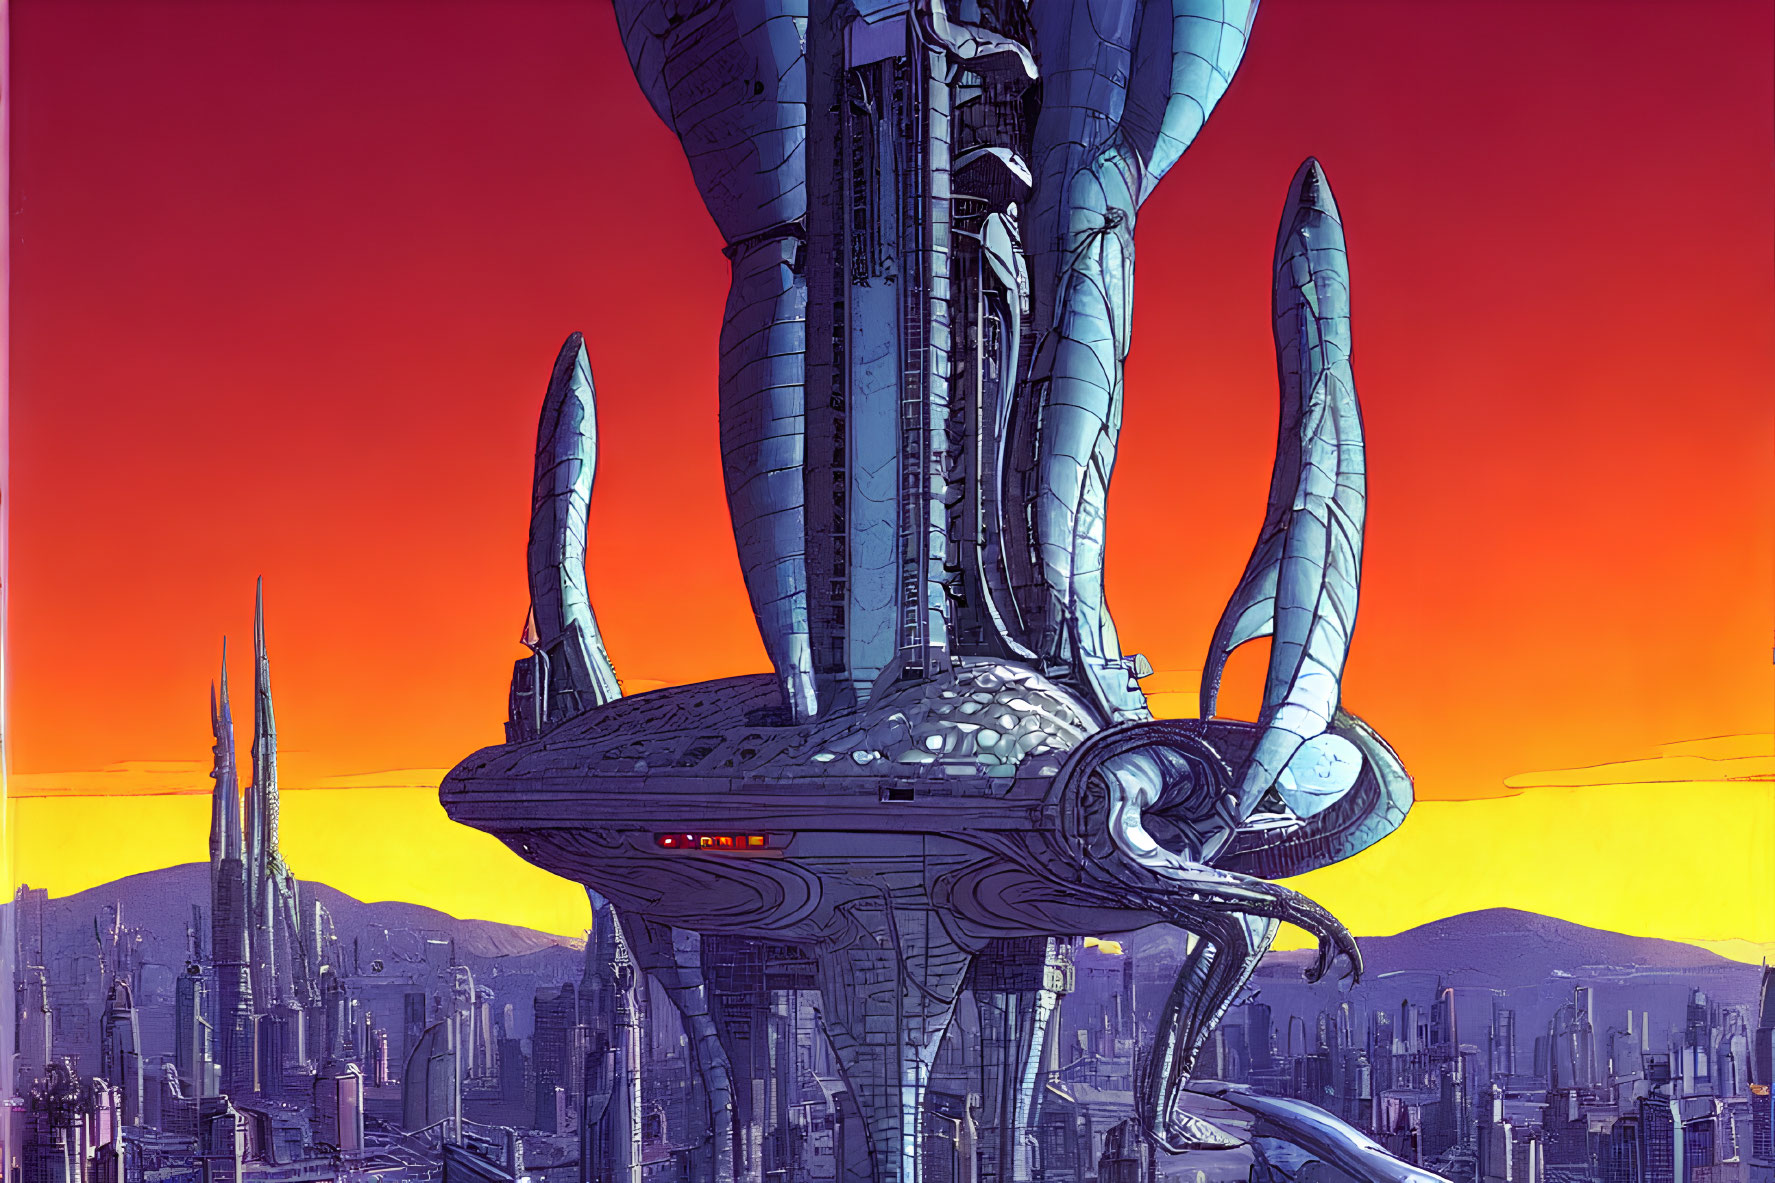 Futuristic cityscape with tentacle-like skyscrapers at sunset